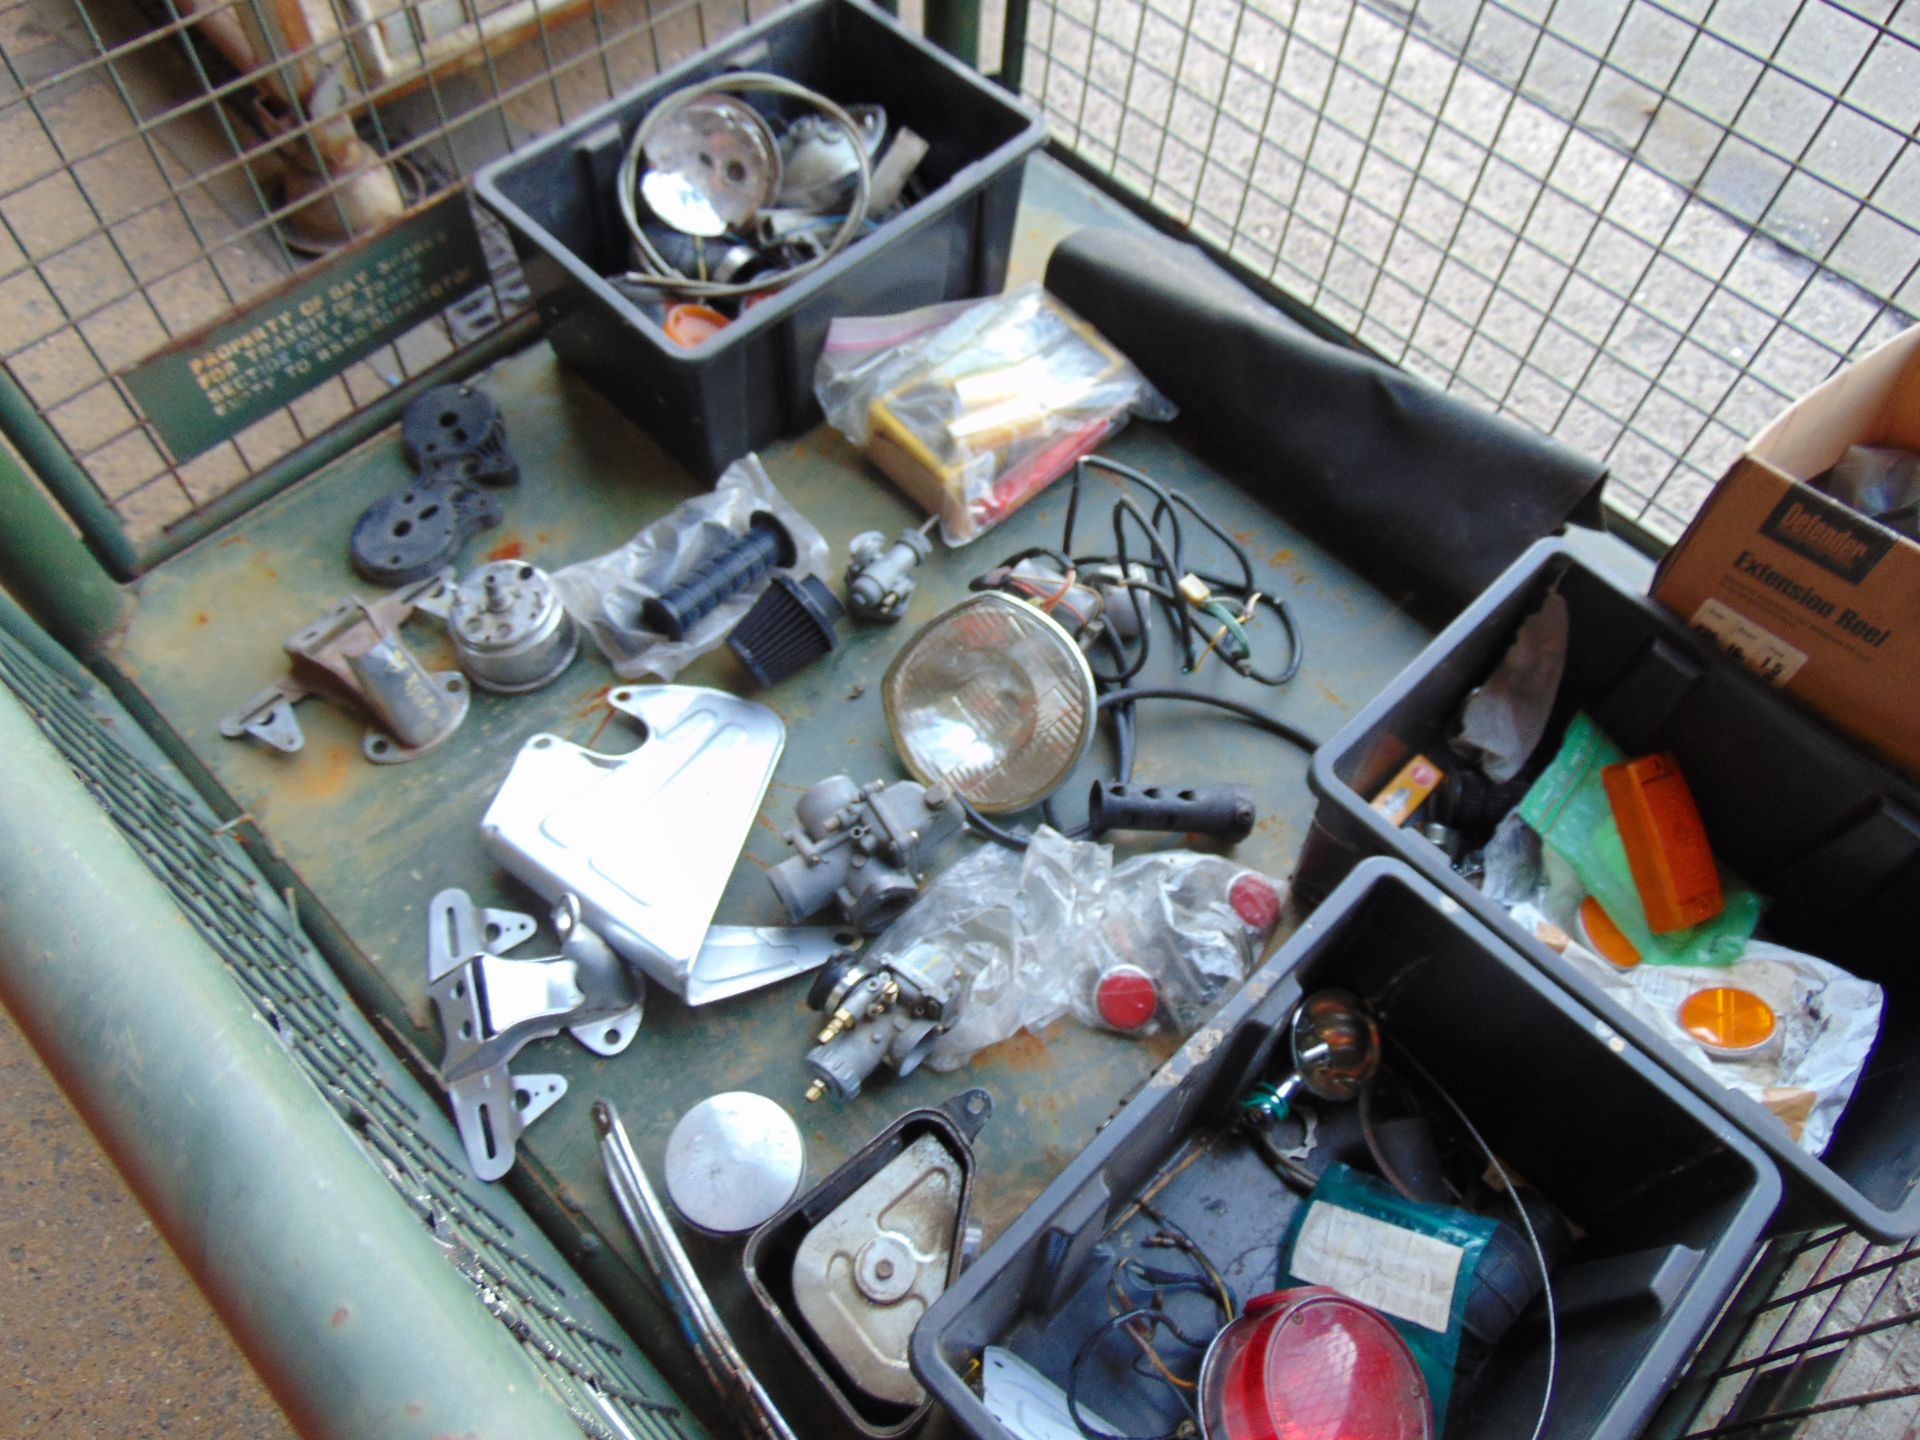 1 x Stillage of Motorcycle Spare Parts inc Carburettor Pistons etc - Image 6 of 7